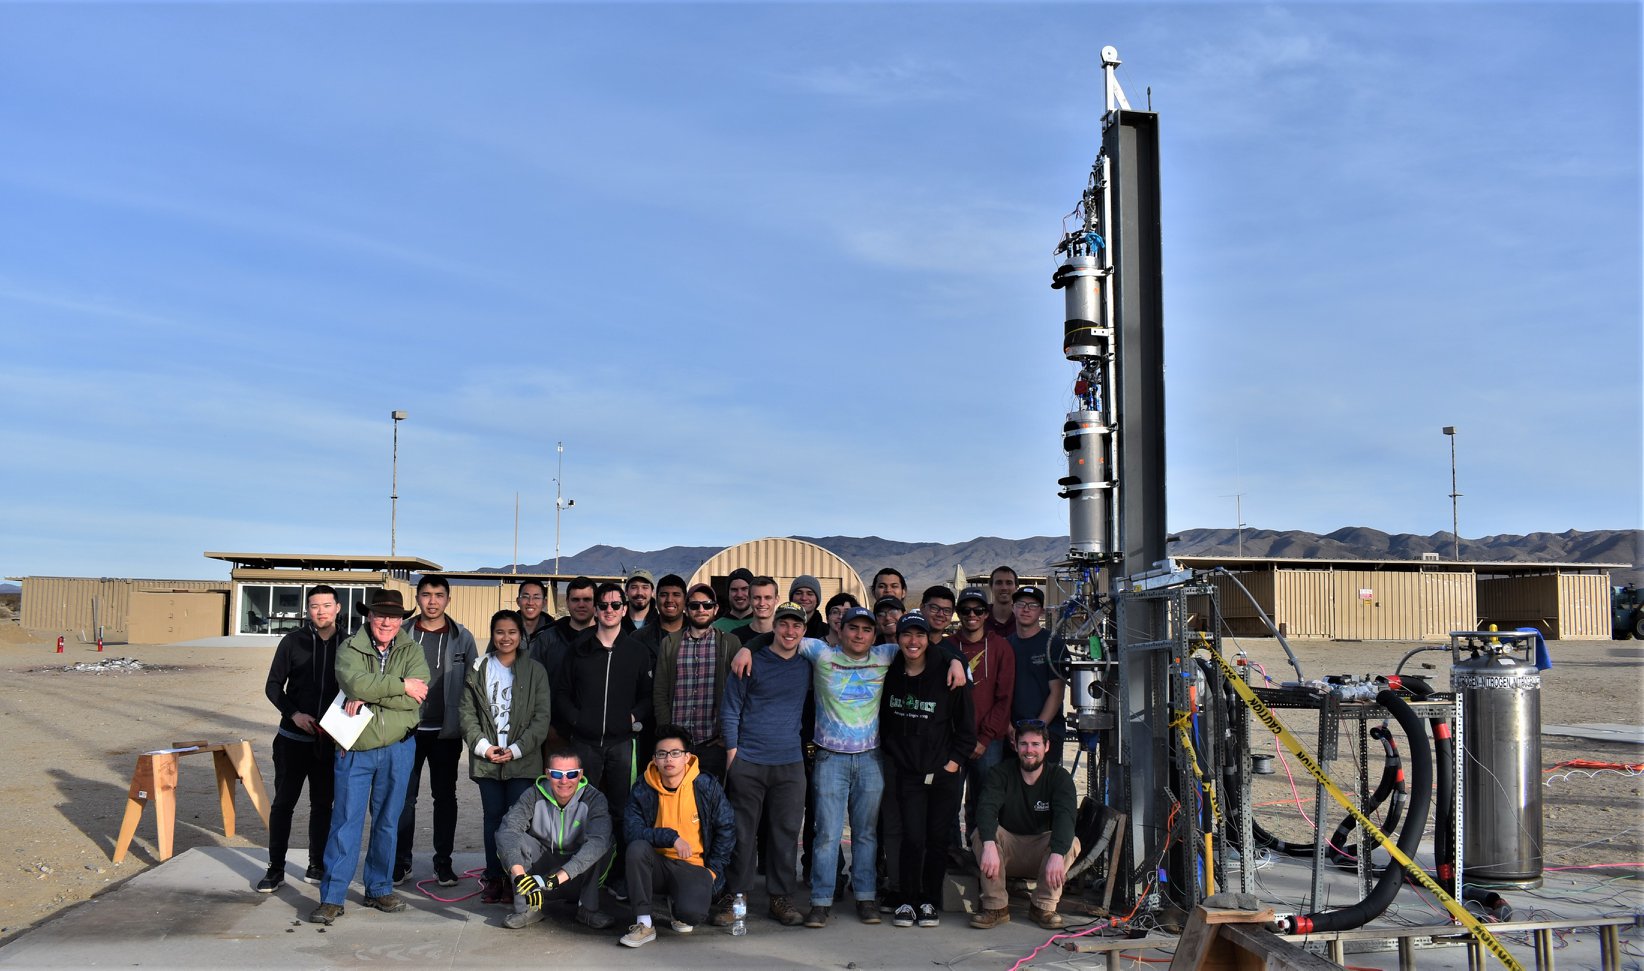 LRL students testing the rocket